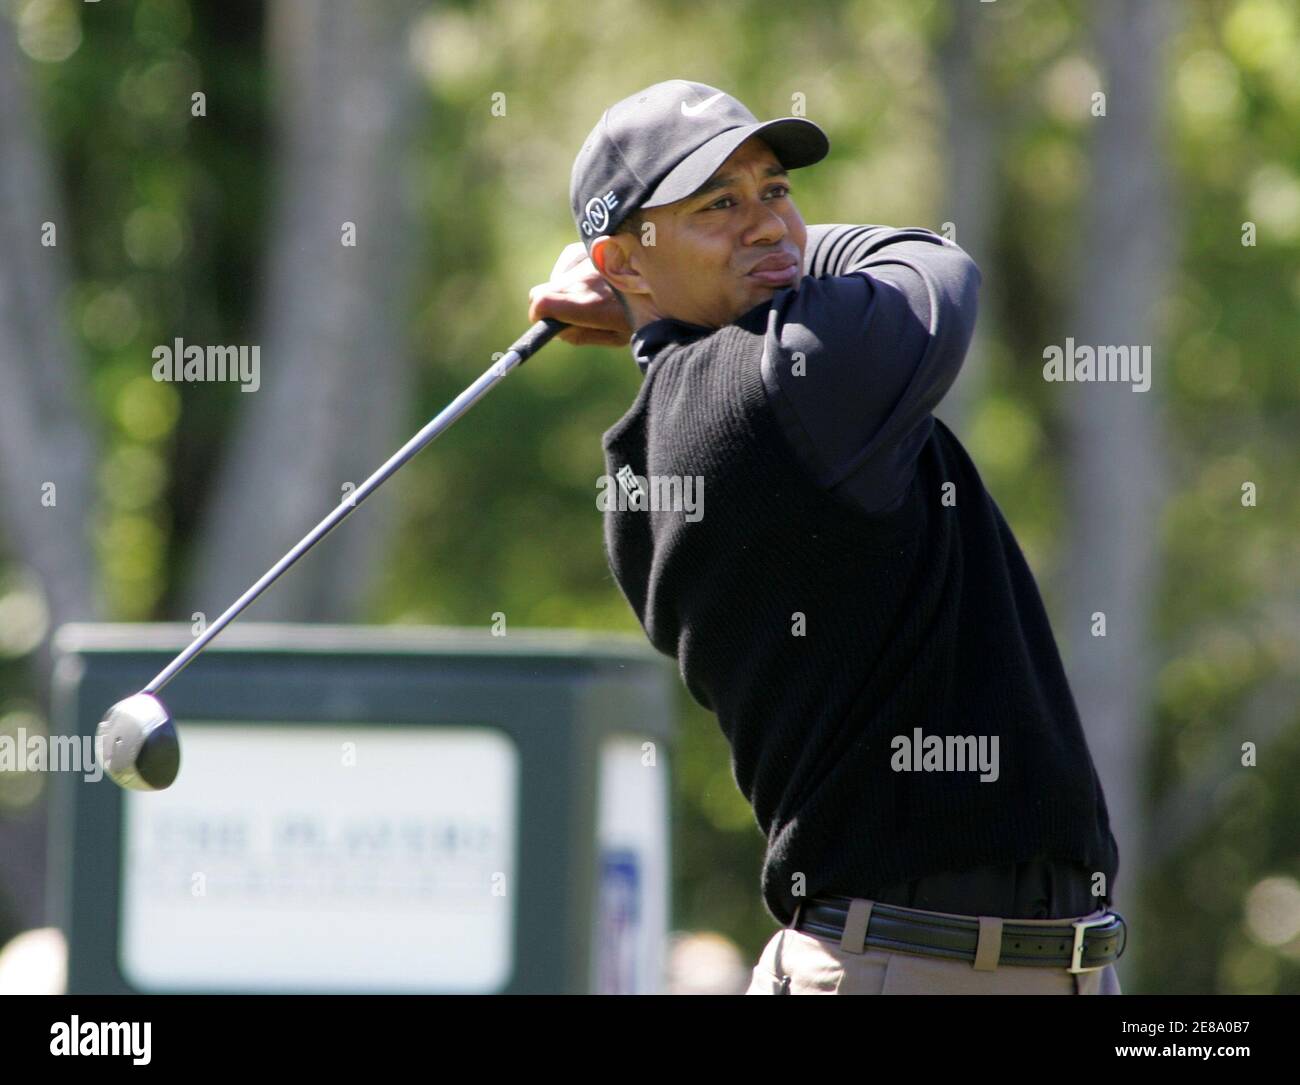 Tiger Woods of the United States tees off on the seventh hole during the third round at the Players Championship golf tournament in Ponte Vedra Beach, Florida on March 25, 2006. REUTERS/Rick Fowler Stock Photo